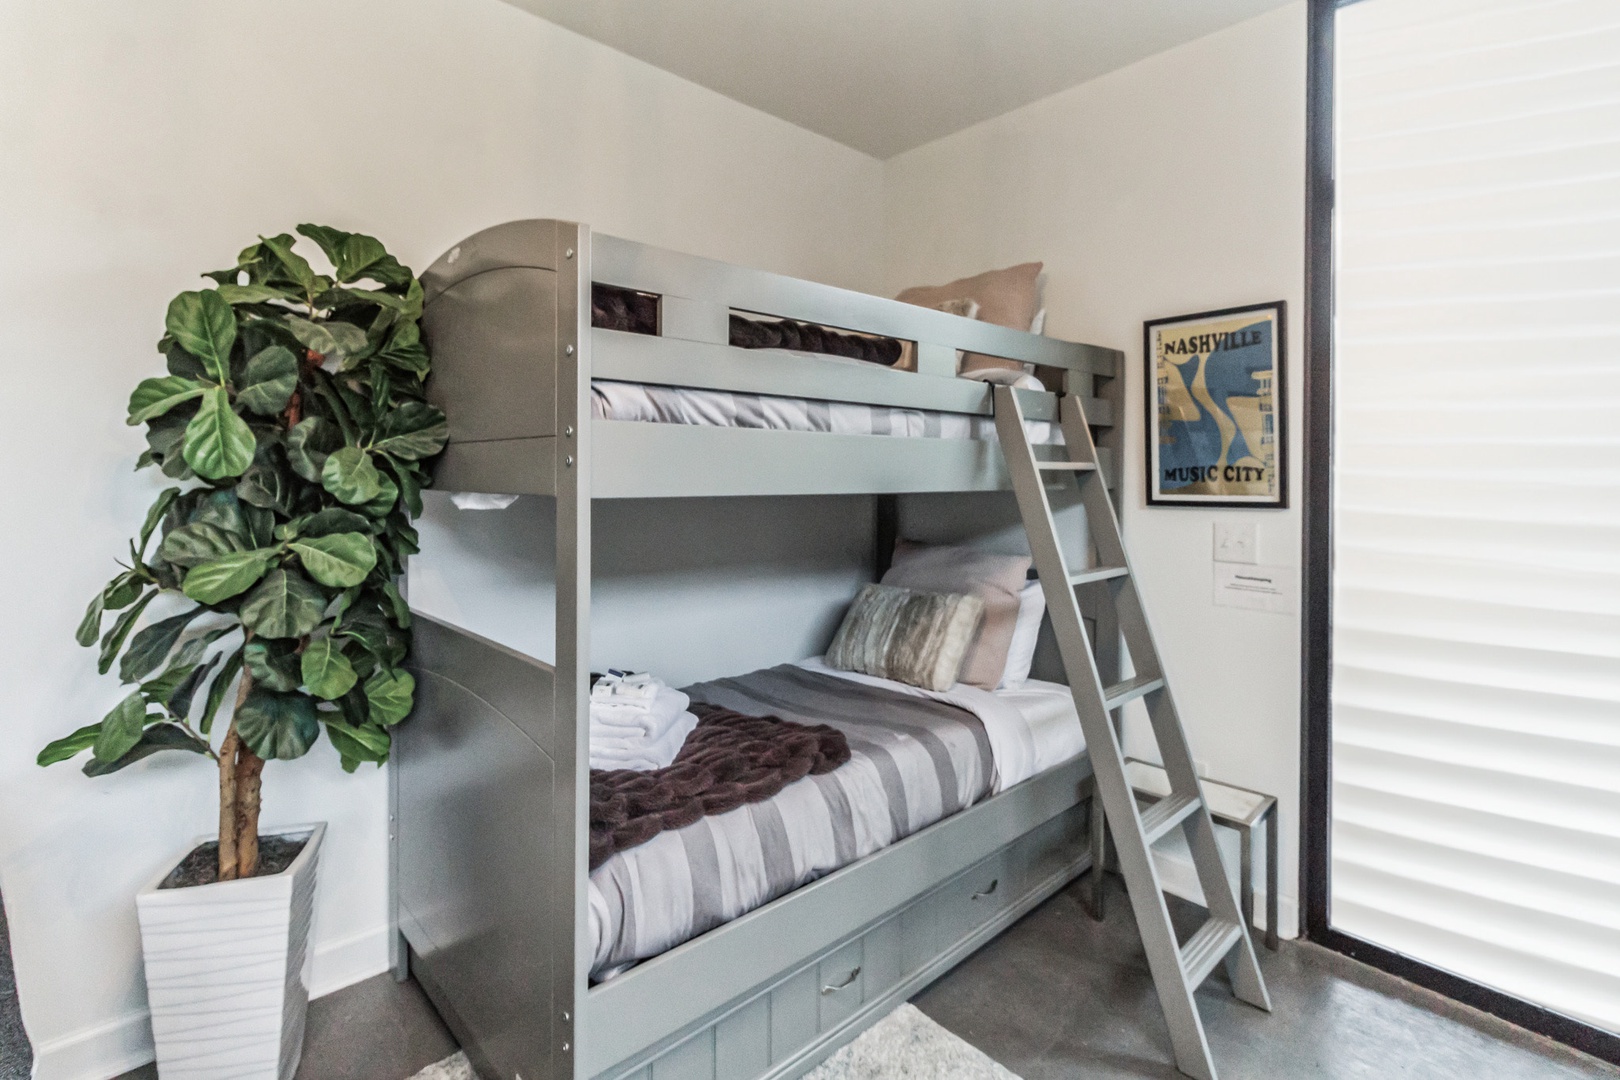 The chic first floor common area offers a twin-over-twin bunkbed